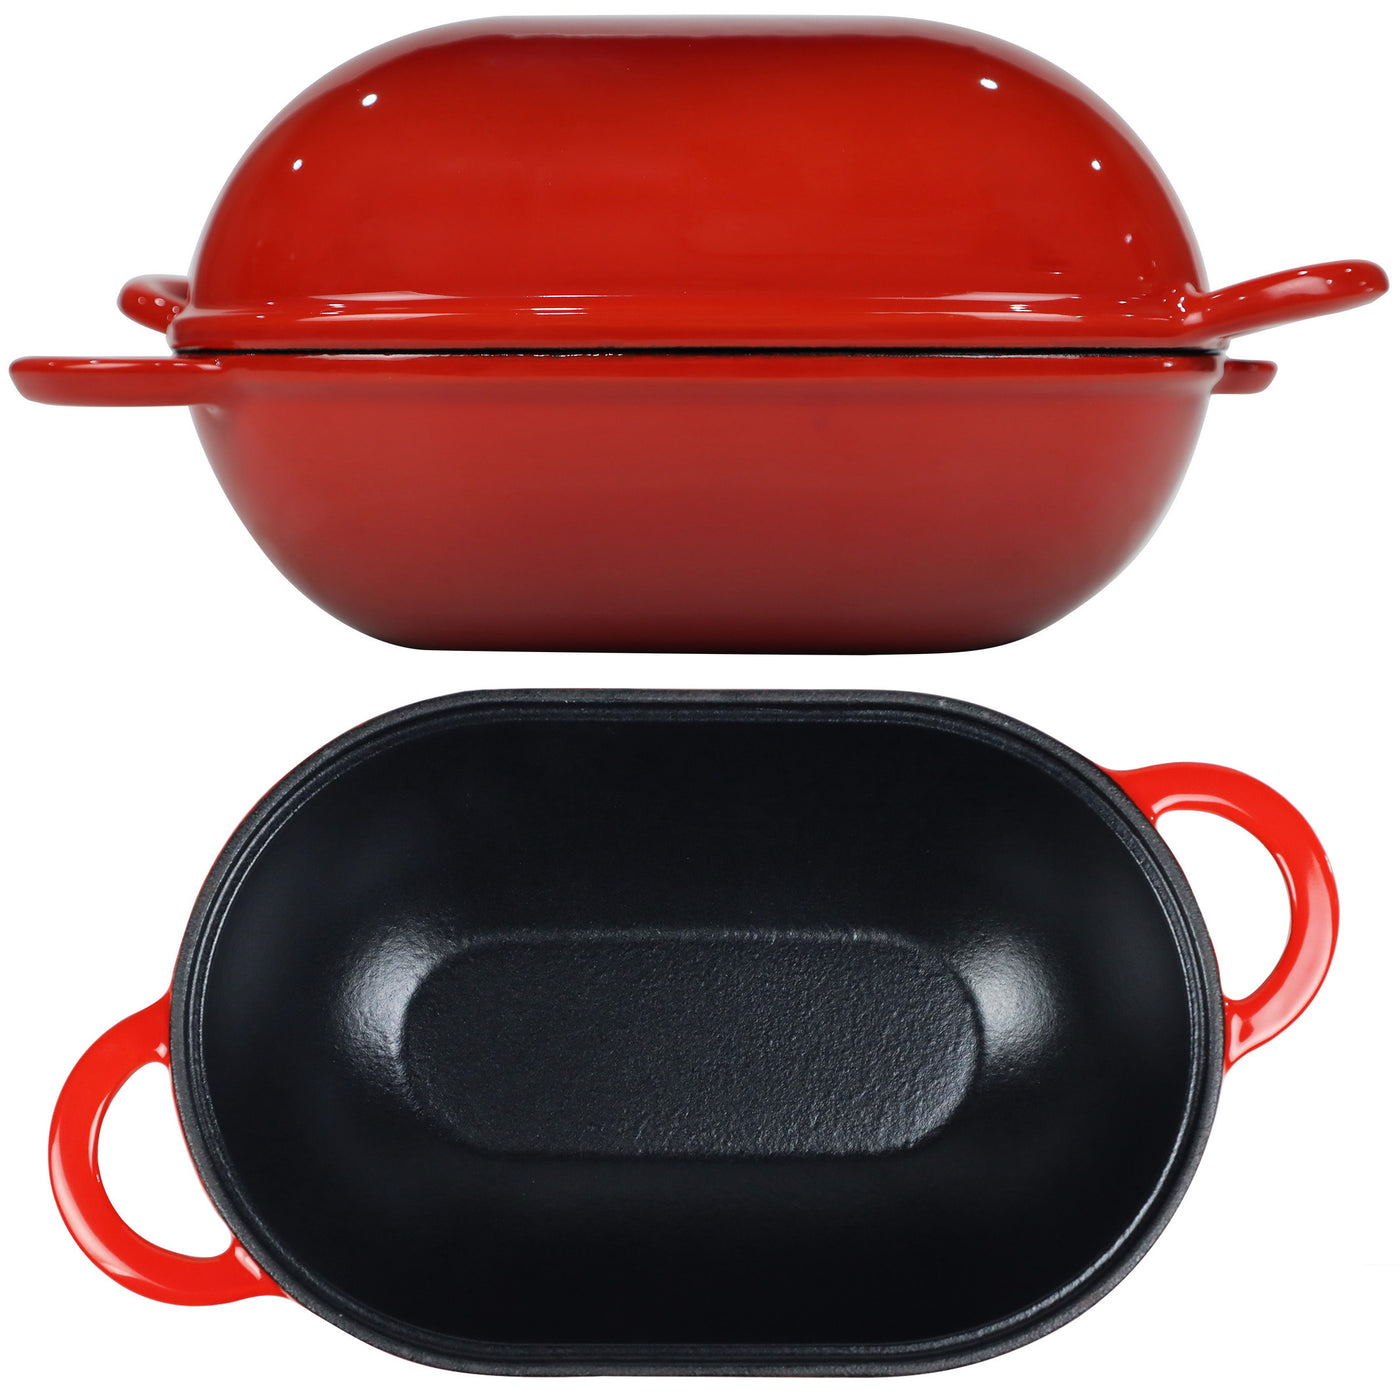 Enameled Cast Iron Bread Pan with Lid Red